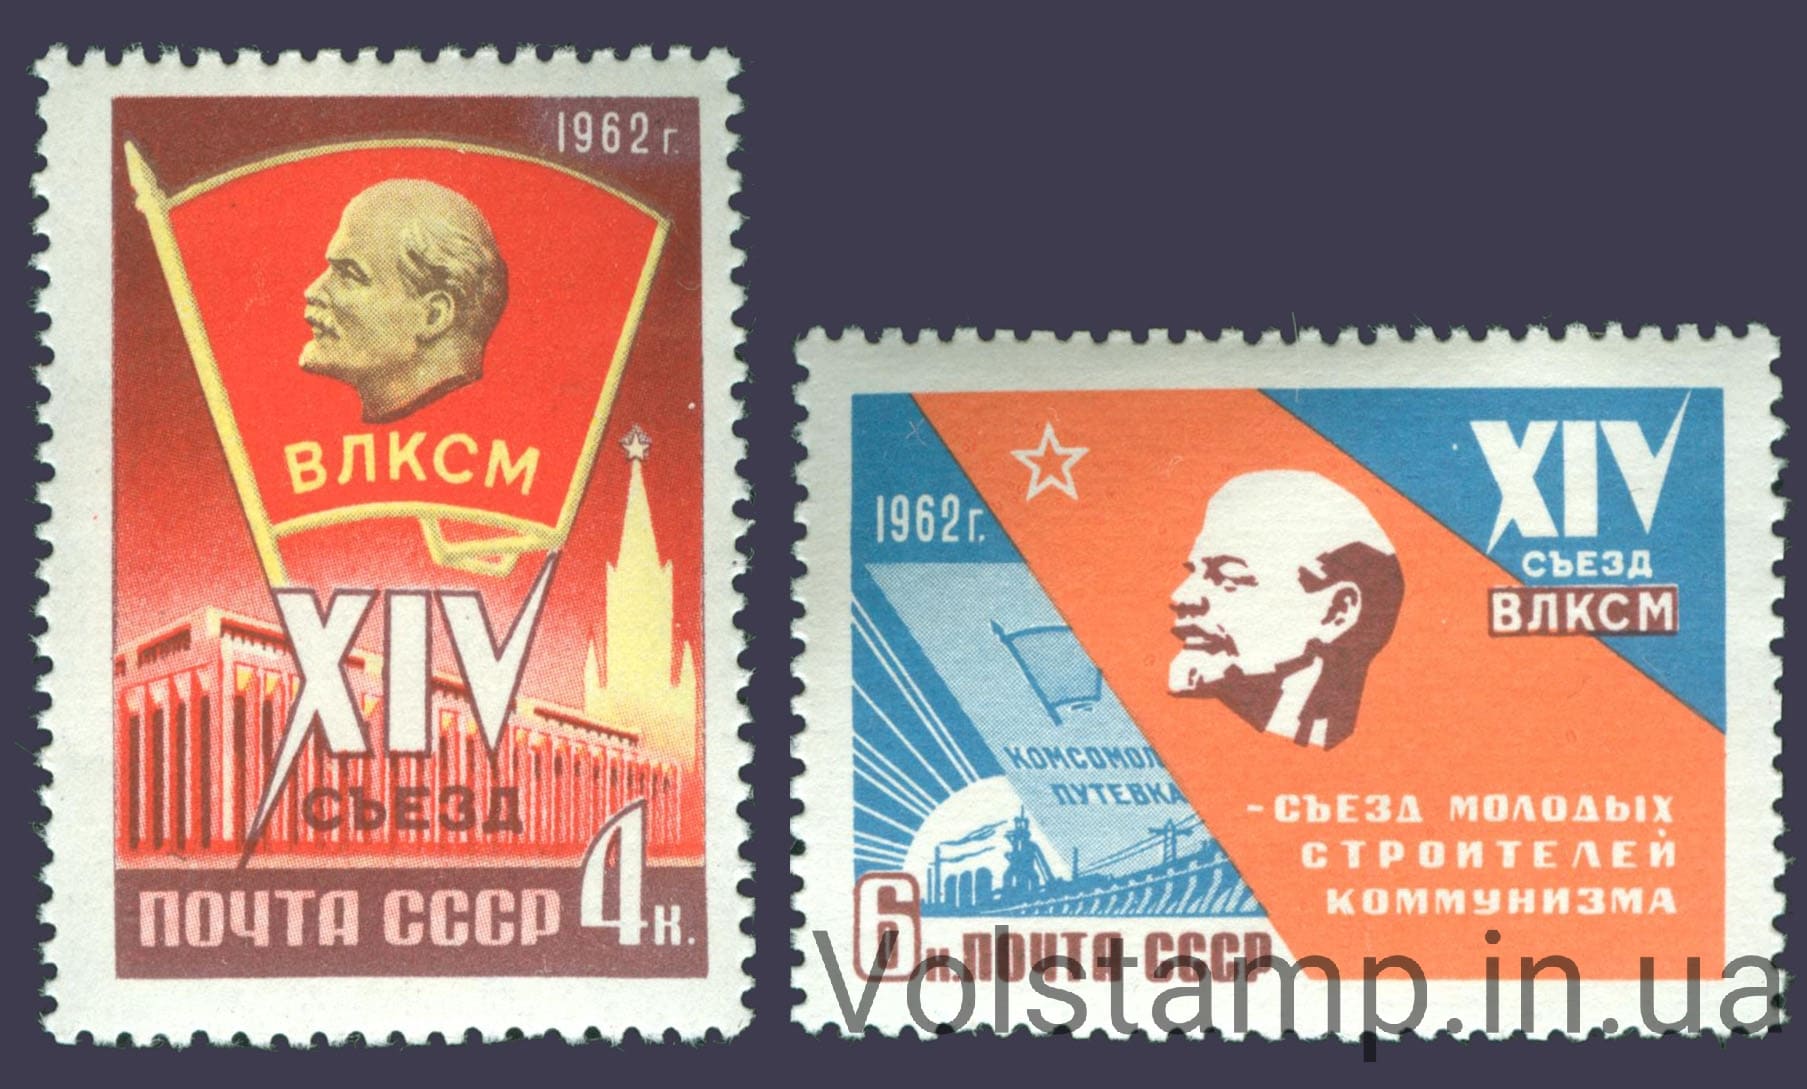 1962 series of stamps XIV Congress of the All-Union Leninsky Communist Union of Youth №2580-2581